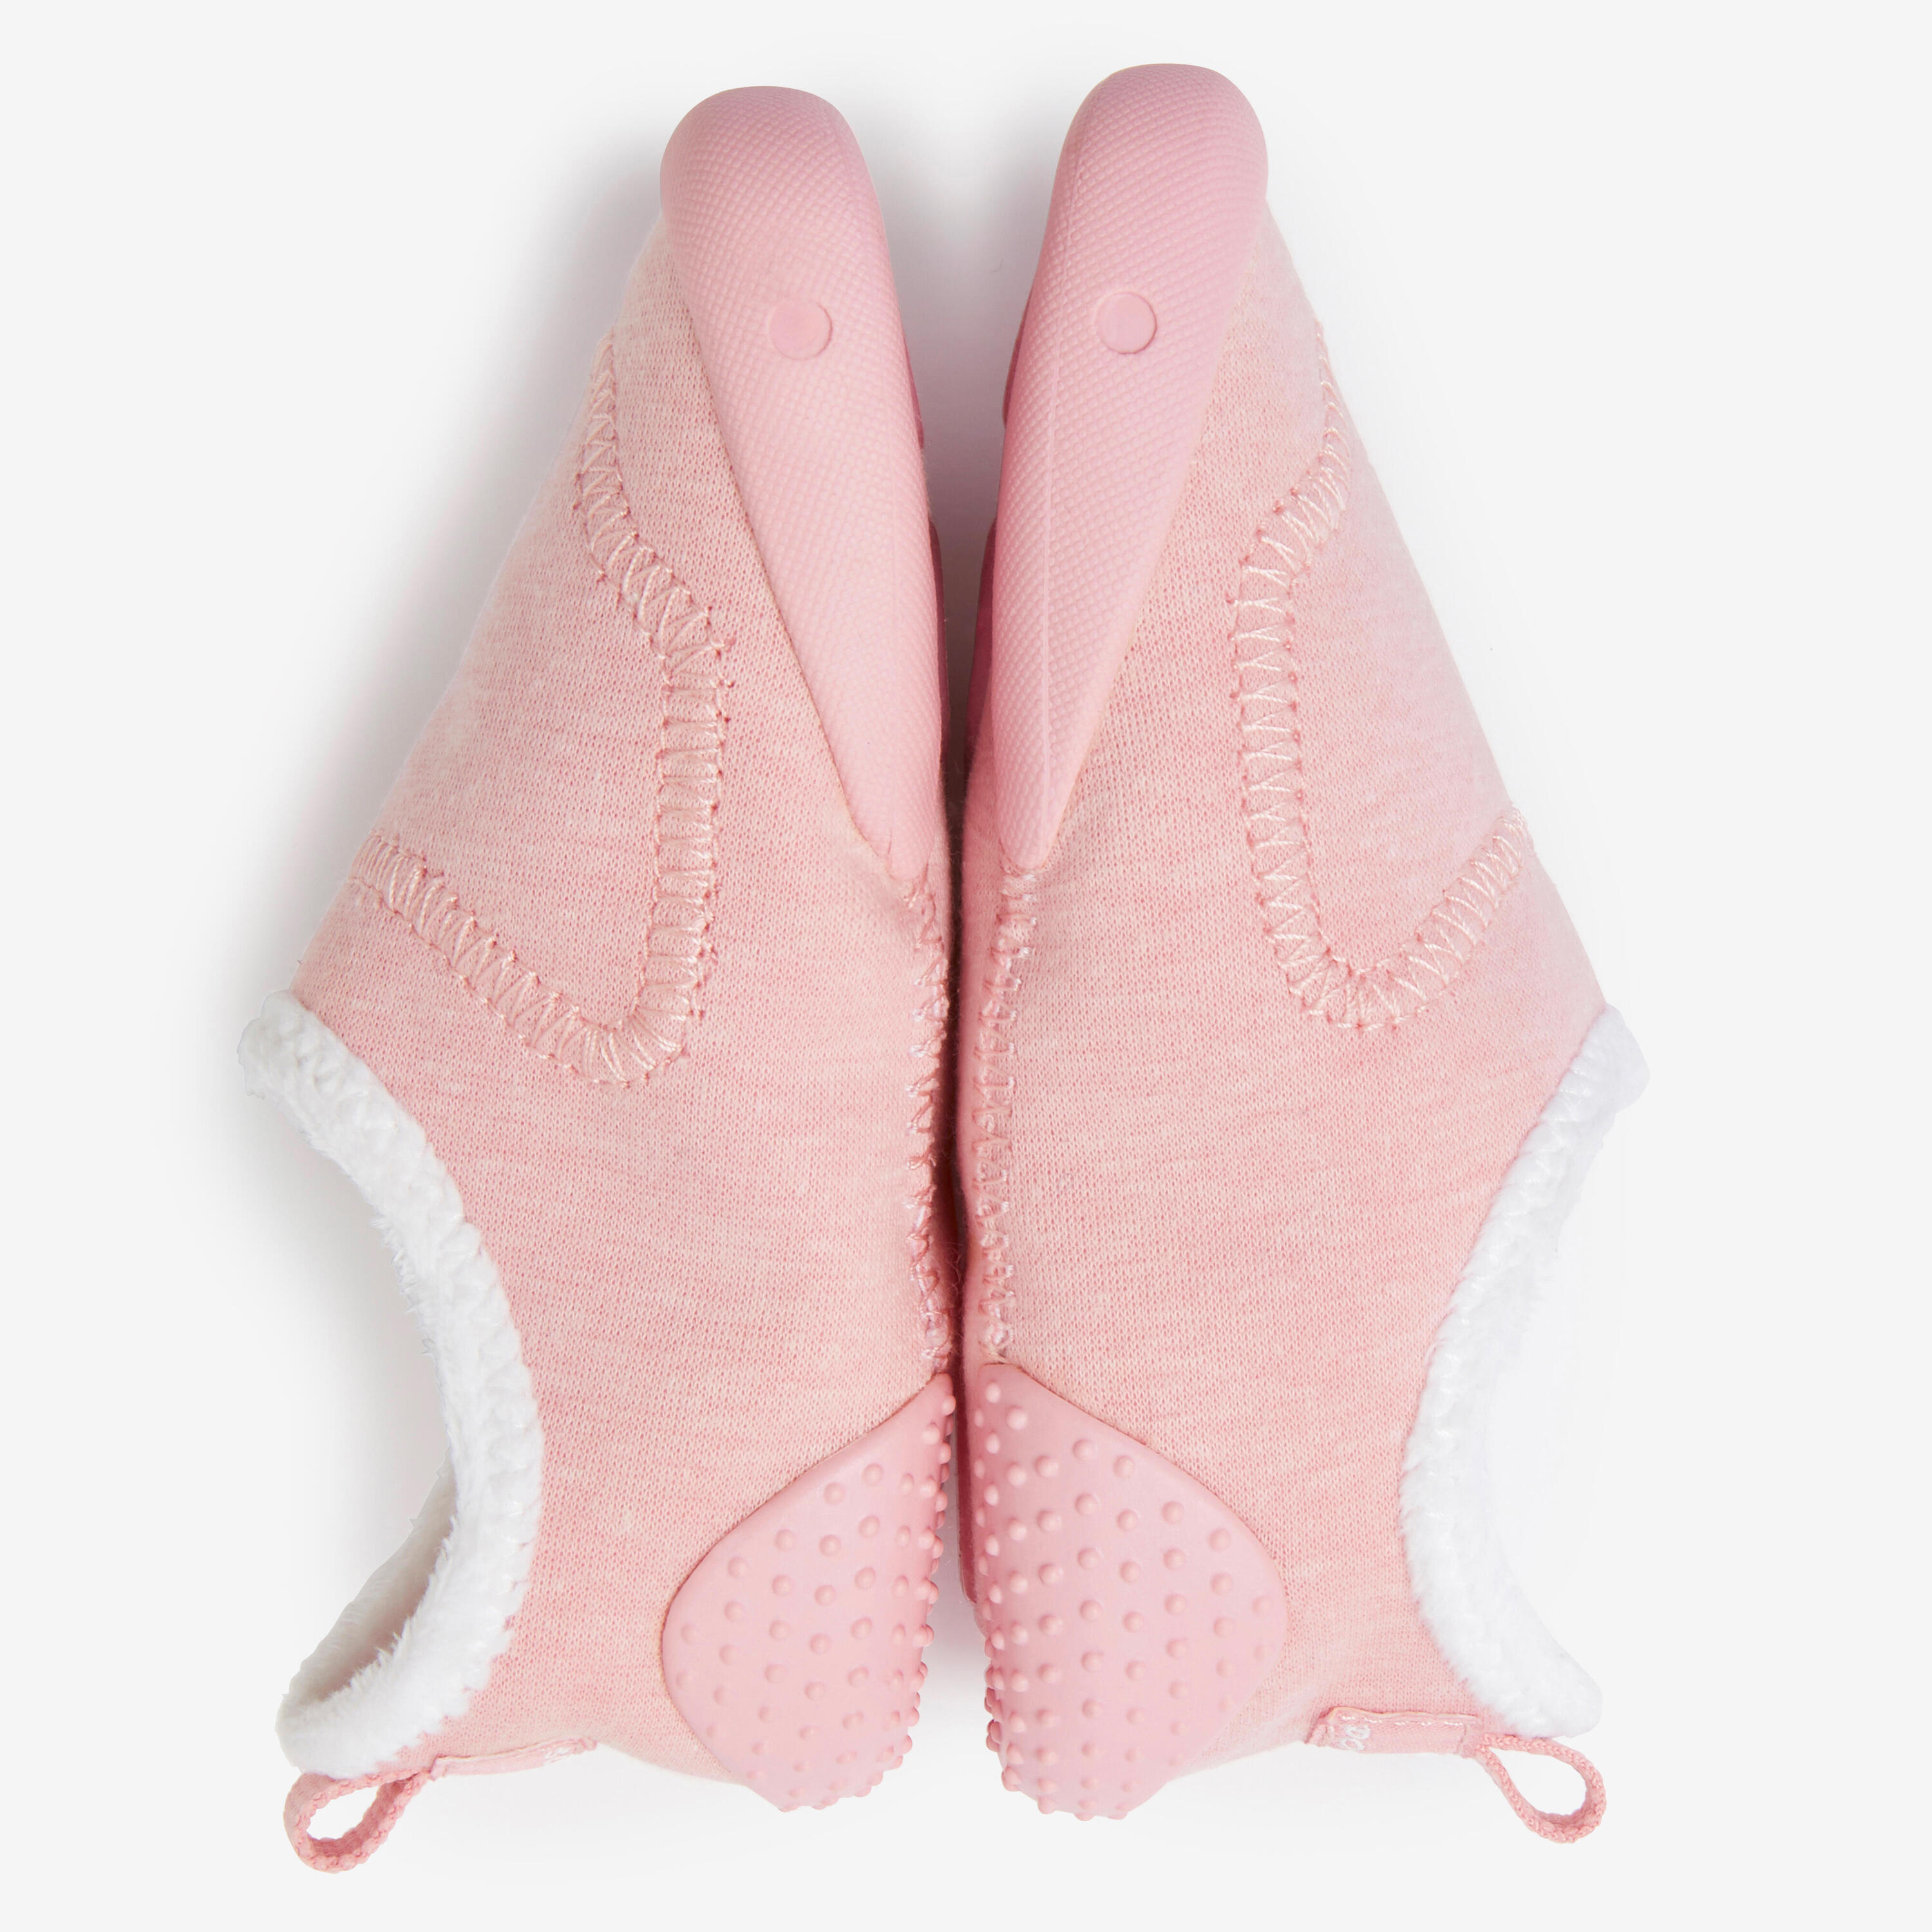 Kids' Comfortable Bootee 550 Babylight - Pink 7/7